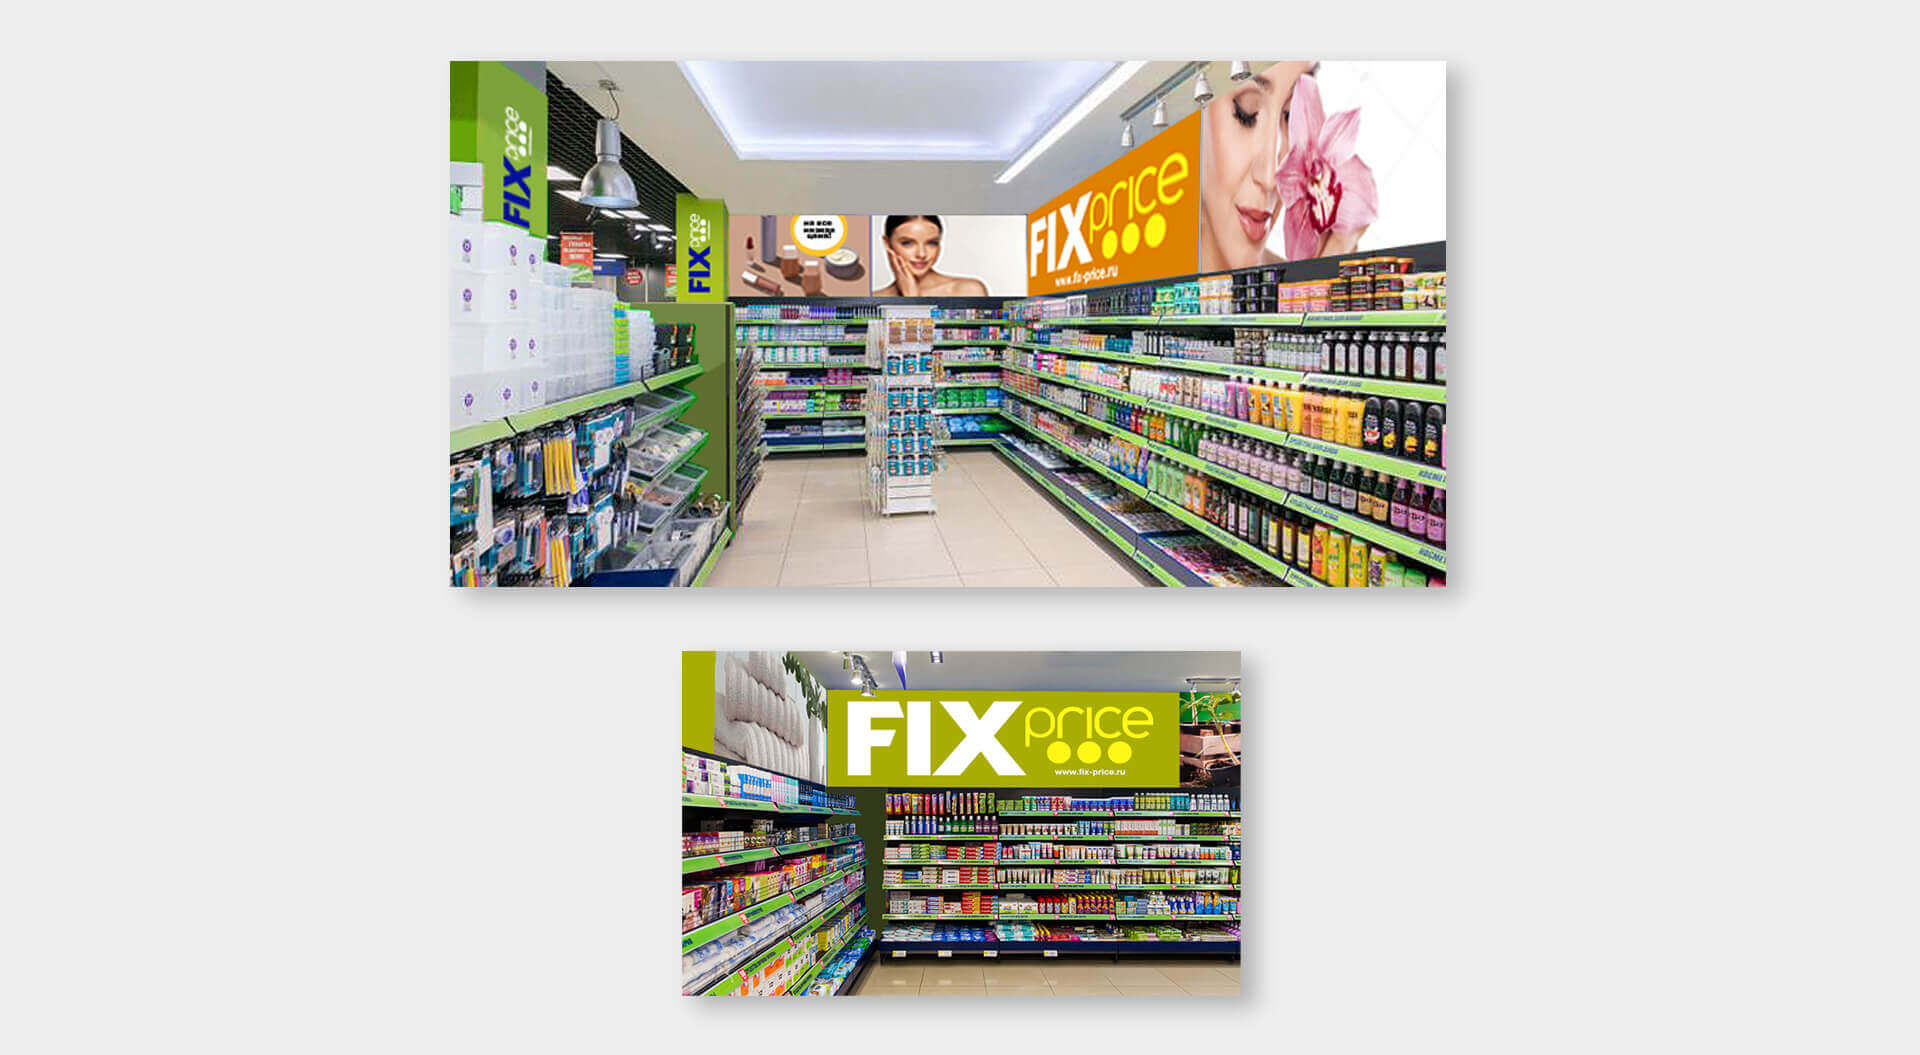 Fix Price Russia, Branding, Brand Identity, Icon Design, Internal Department Signage Retail, Graphic Communications - CampbellRigg Agency